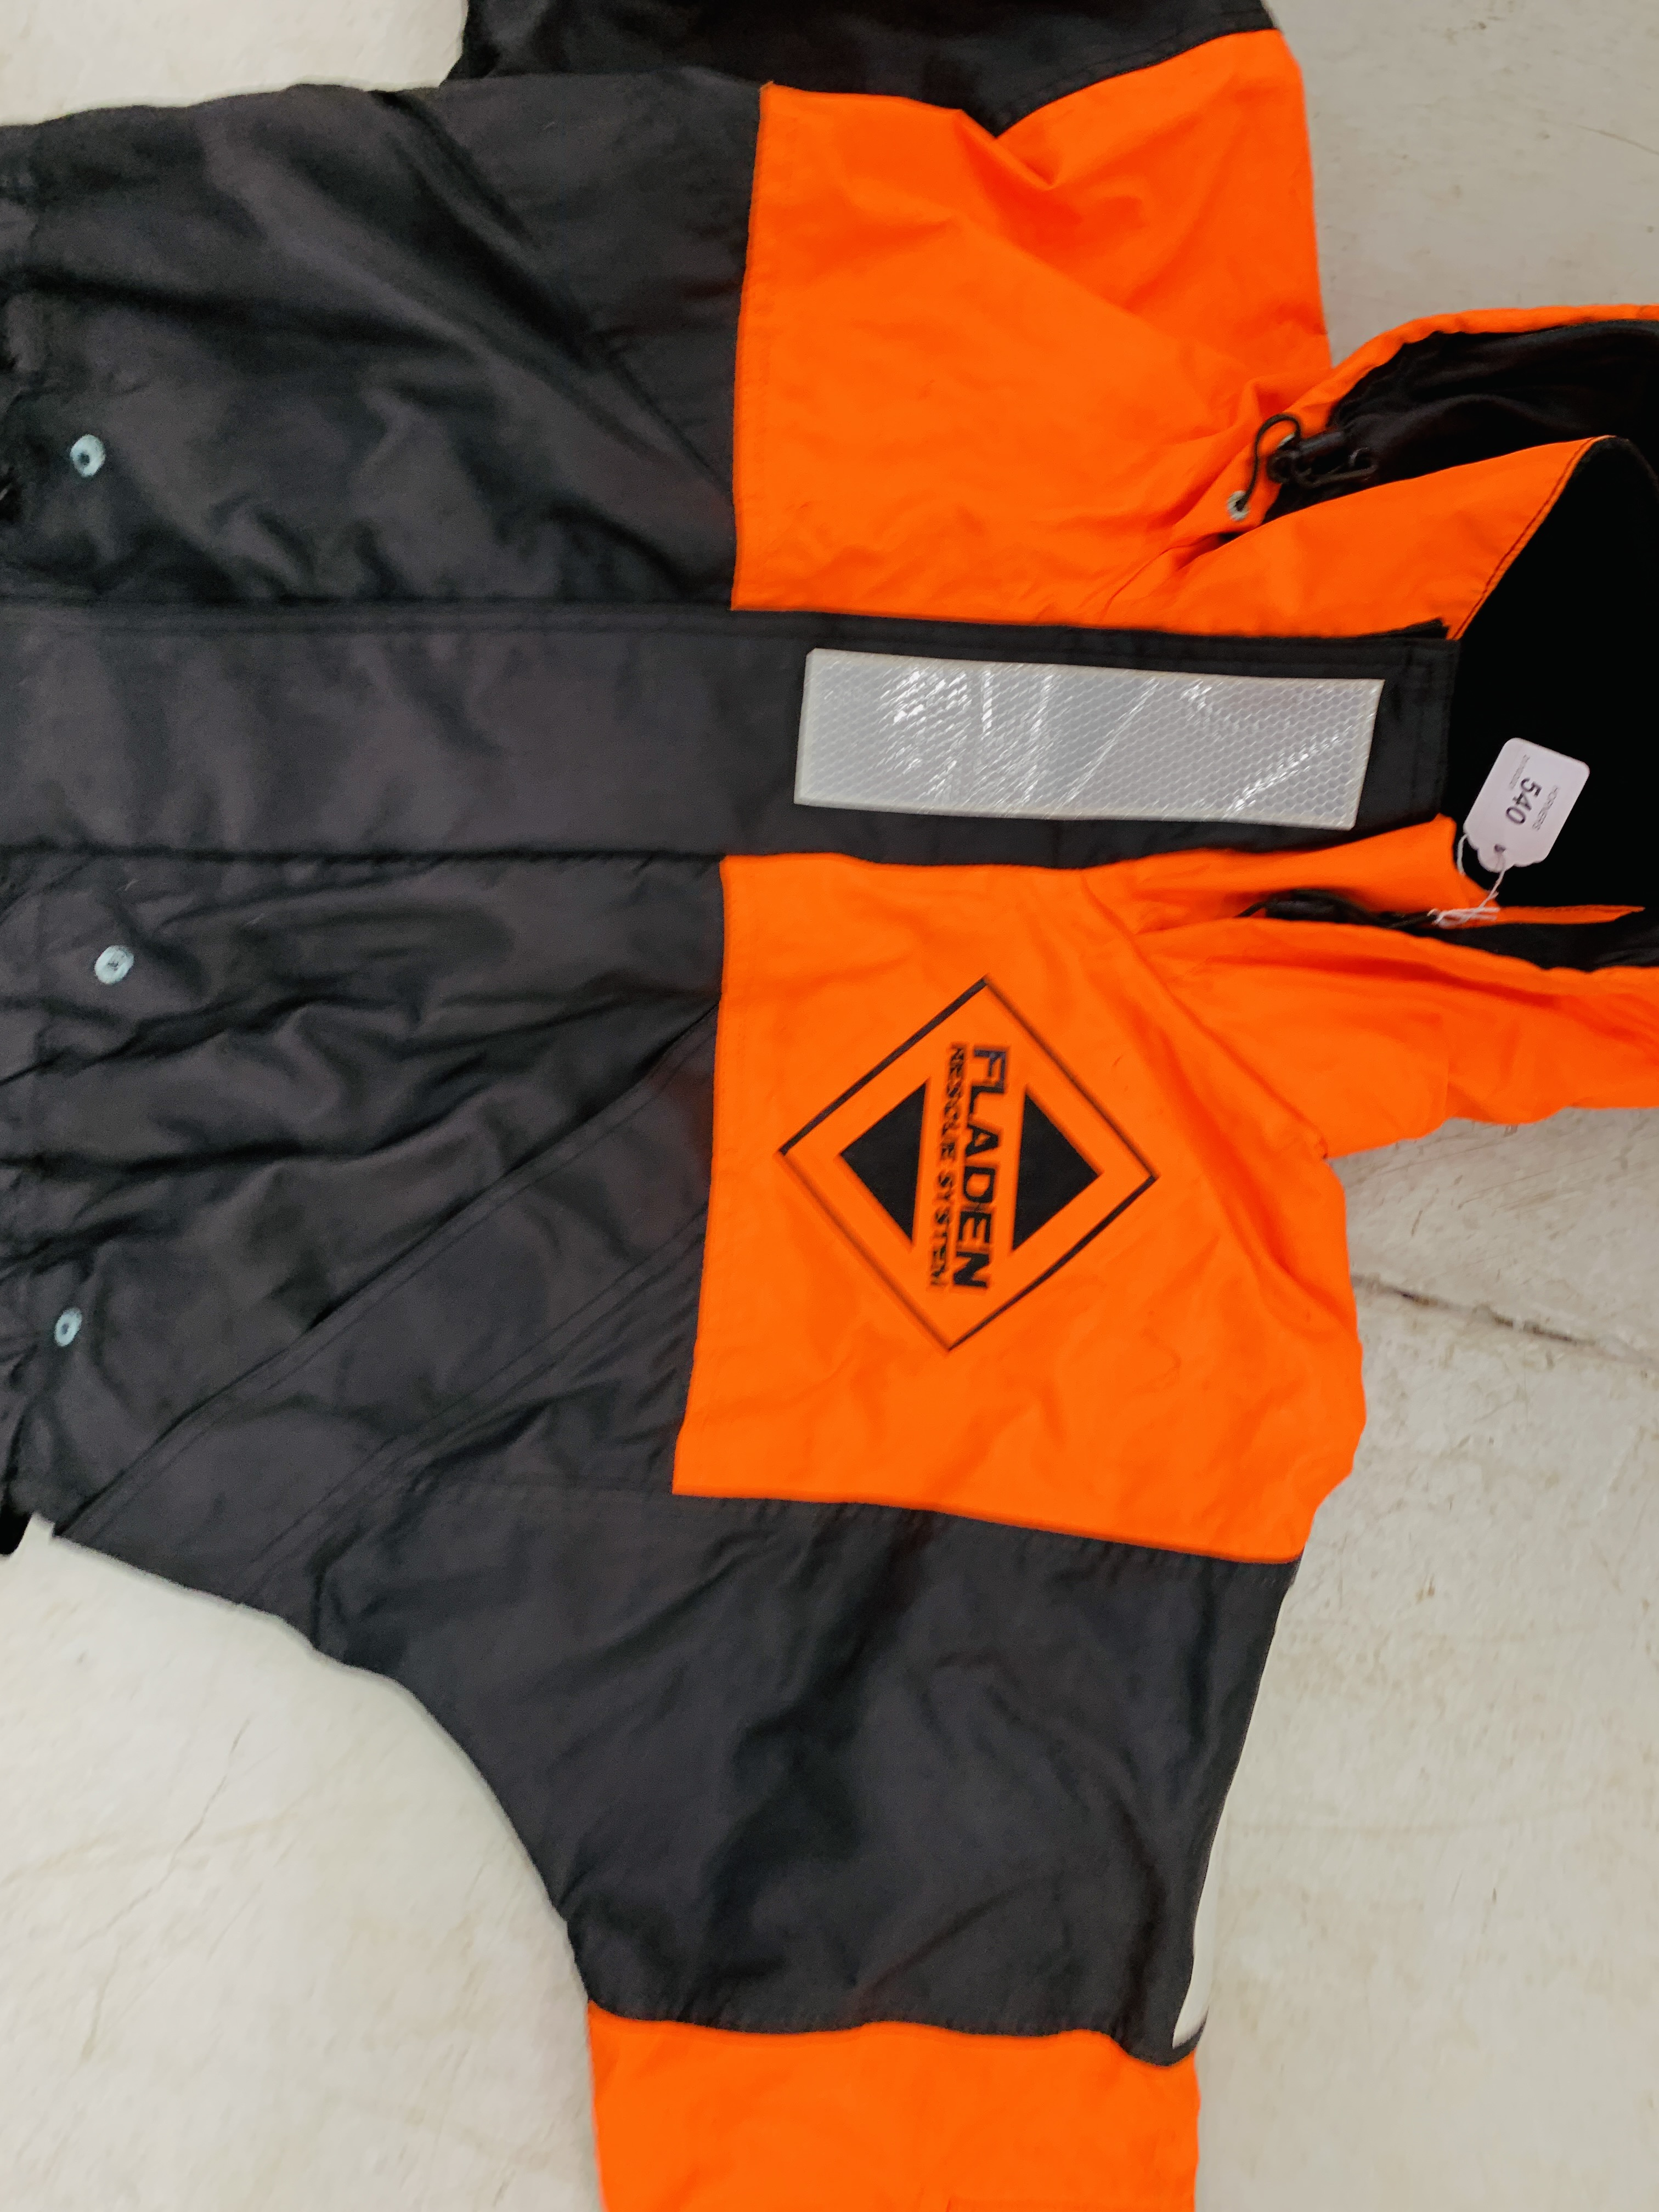 A FLADEN RESCUE SYSTEM FULL BODY SUIT SIZE LARGE (ORANGE AND BLACK) - Image 2 of 3